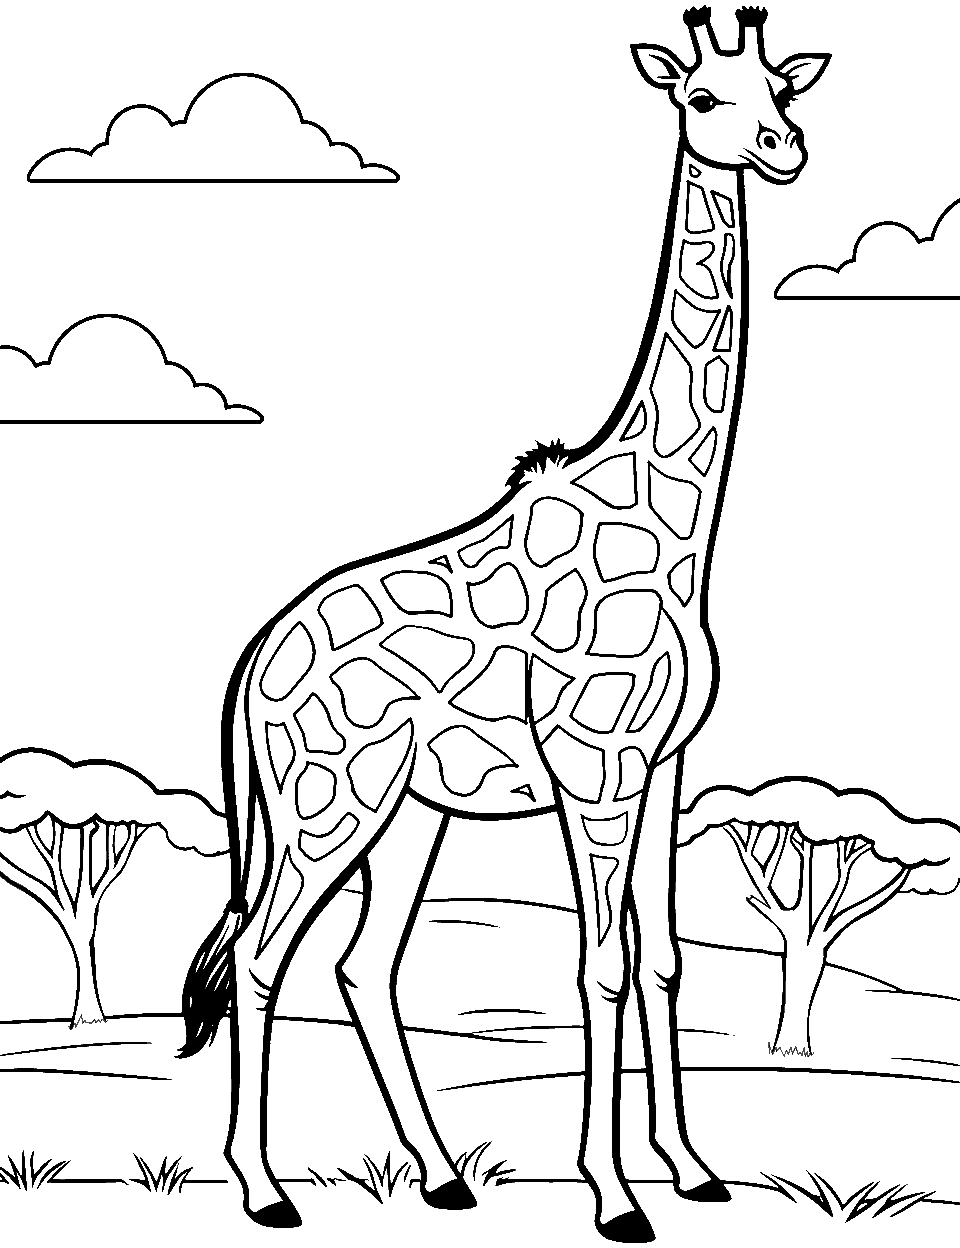 East African Plains Coloring Page - A giraffe walking with African plains in the background.